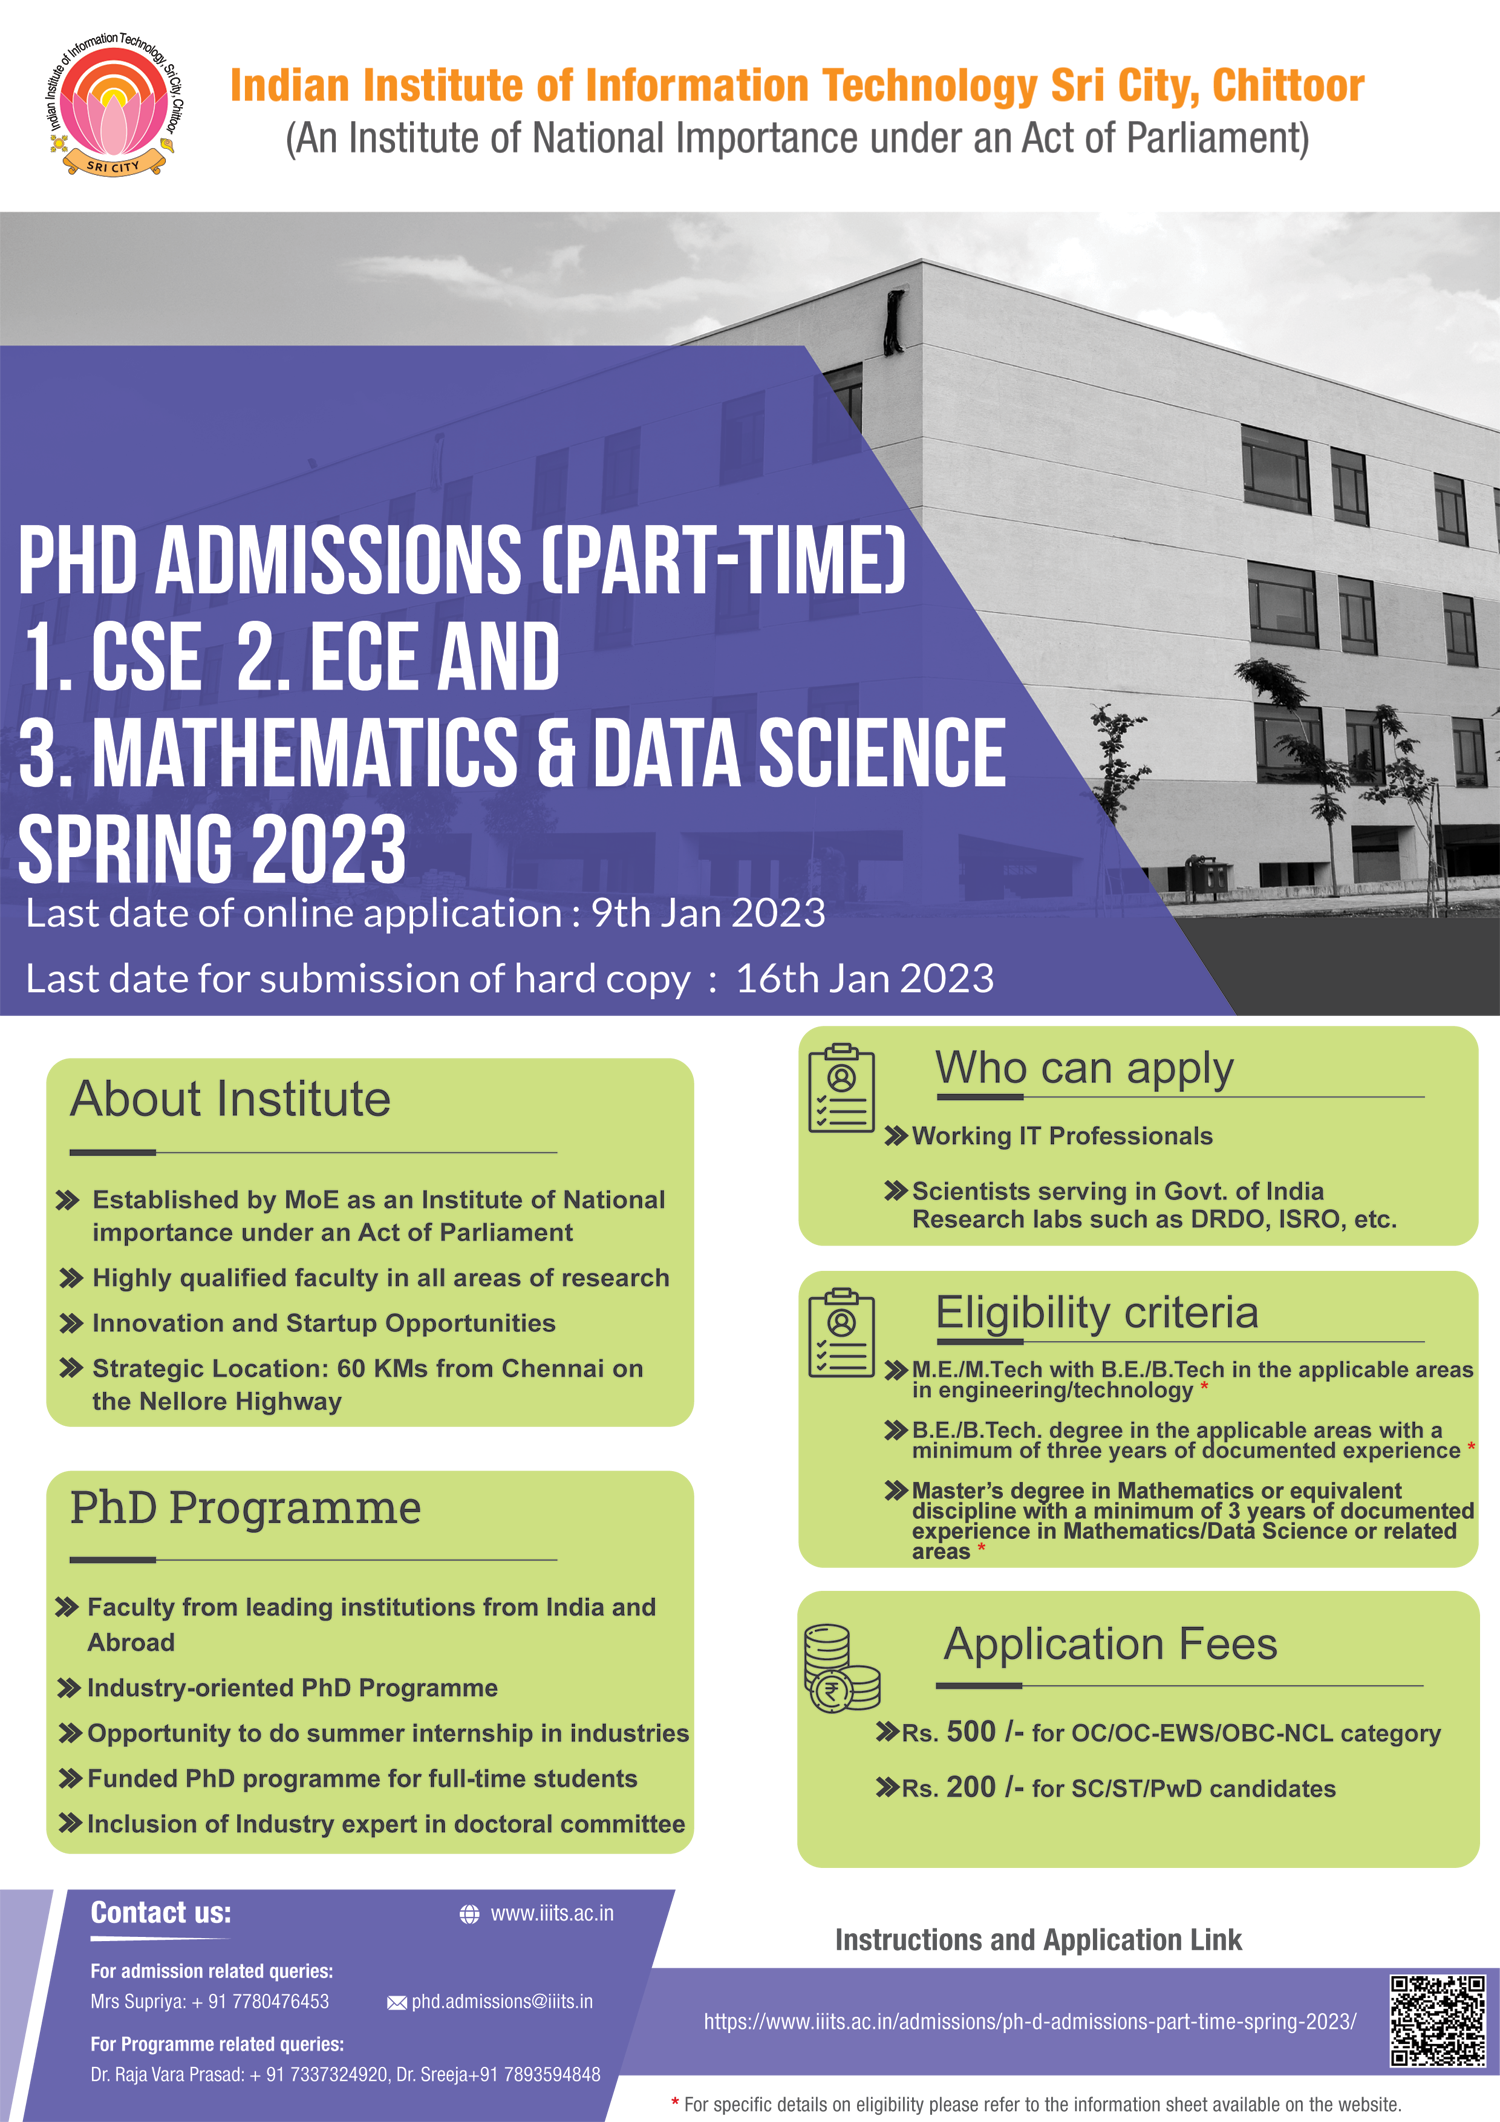 Ph.D. Admissions (PartTime) Spring 2023 Indian Institute of